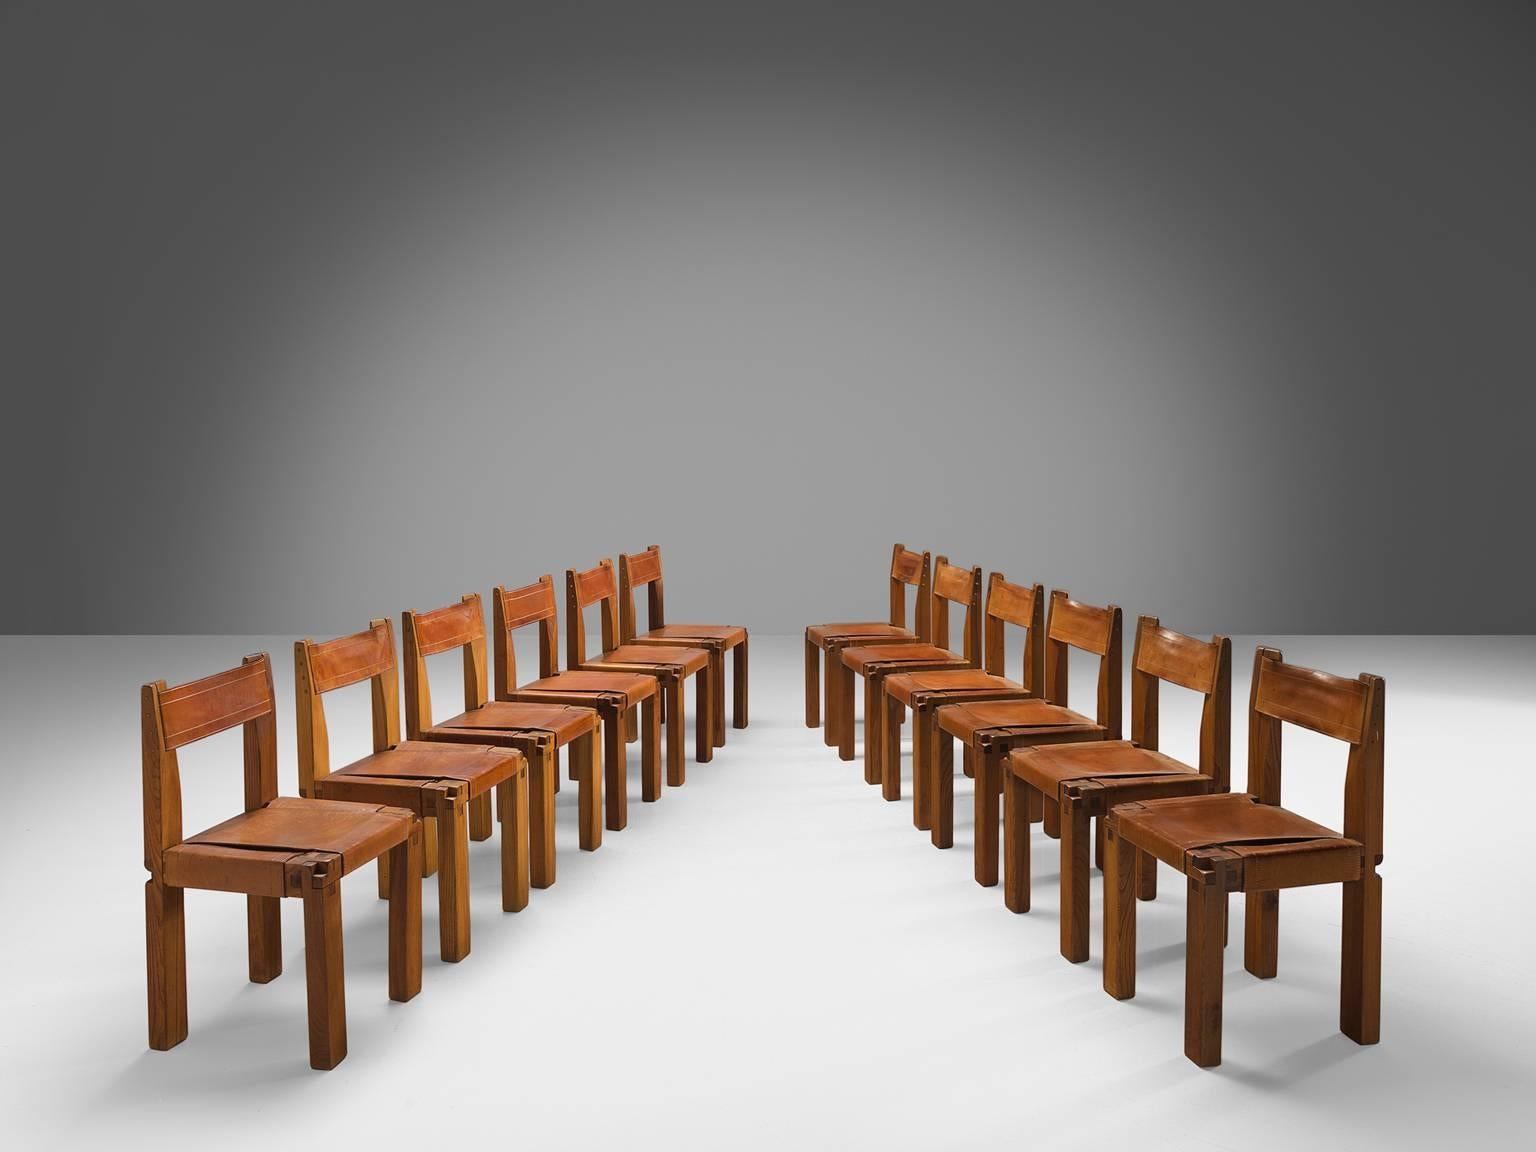 Pierre Chapo, set of 12 dining chairs, model S11, in elm and leather by France, ca. 1966.

Large set of 12 chairs in solid elmwood with saddle leather seating and back. Designed by French designer Pierre Chapo in Paris. These chairs have a cubic